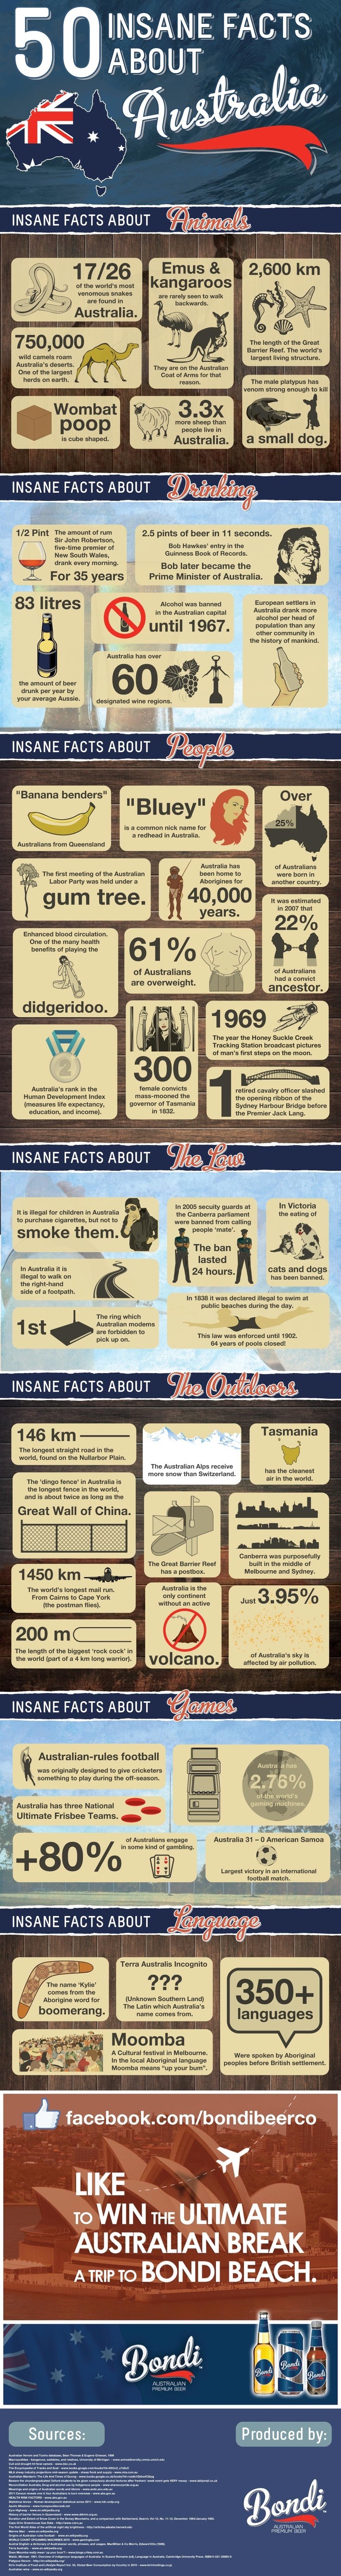 Facts About Australia infographic